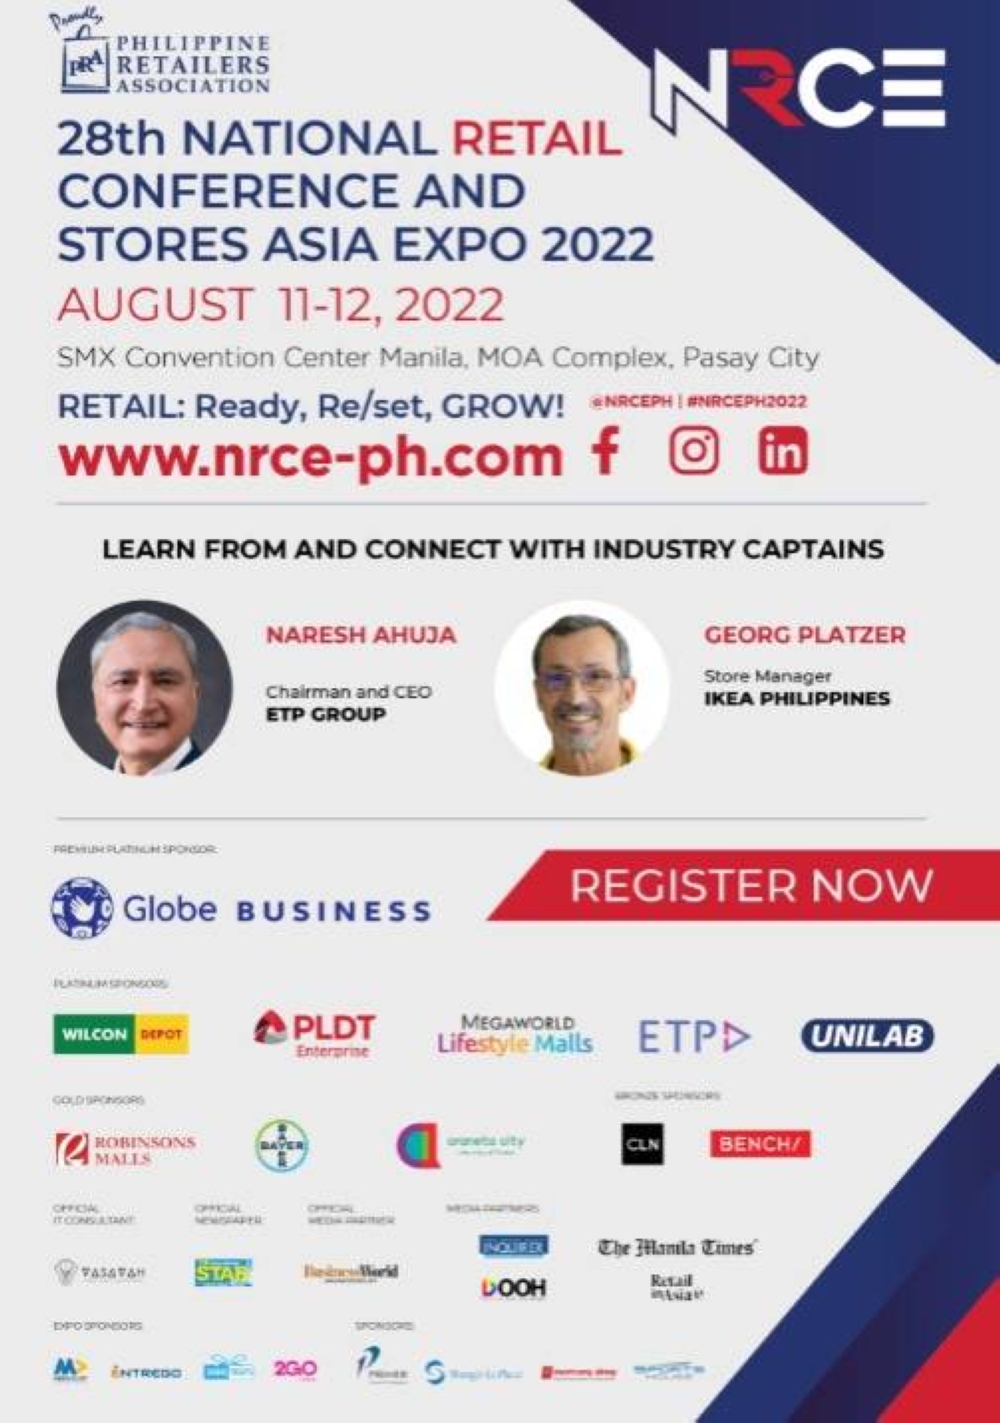 National Retail Conference showcases industry's resilience The Manila